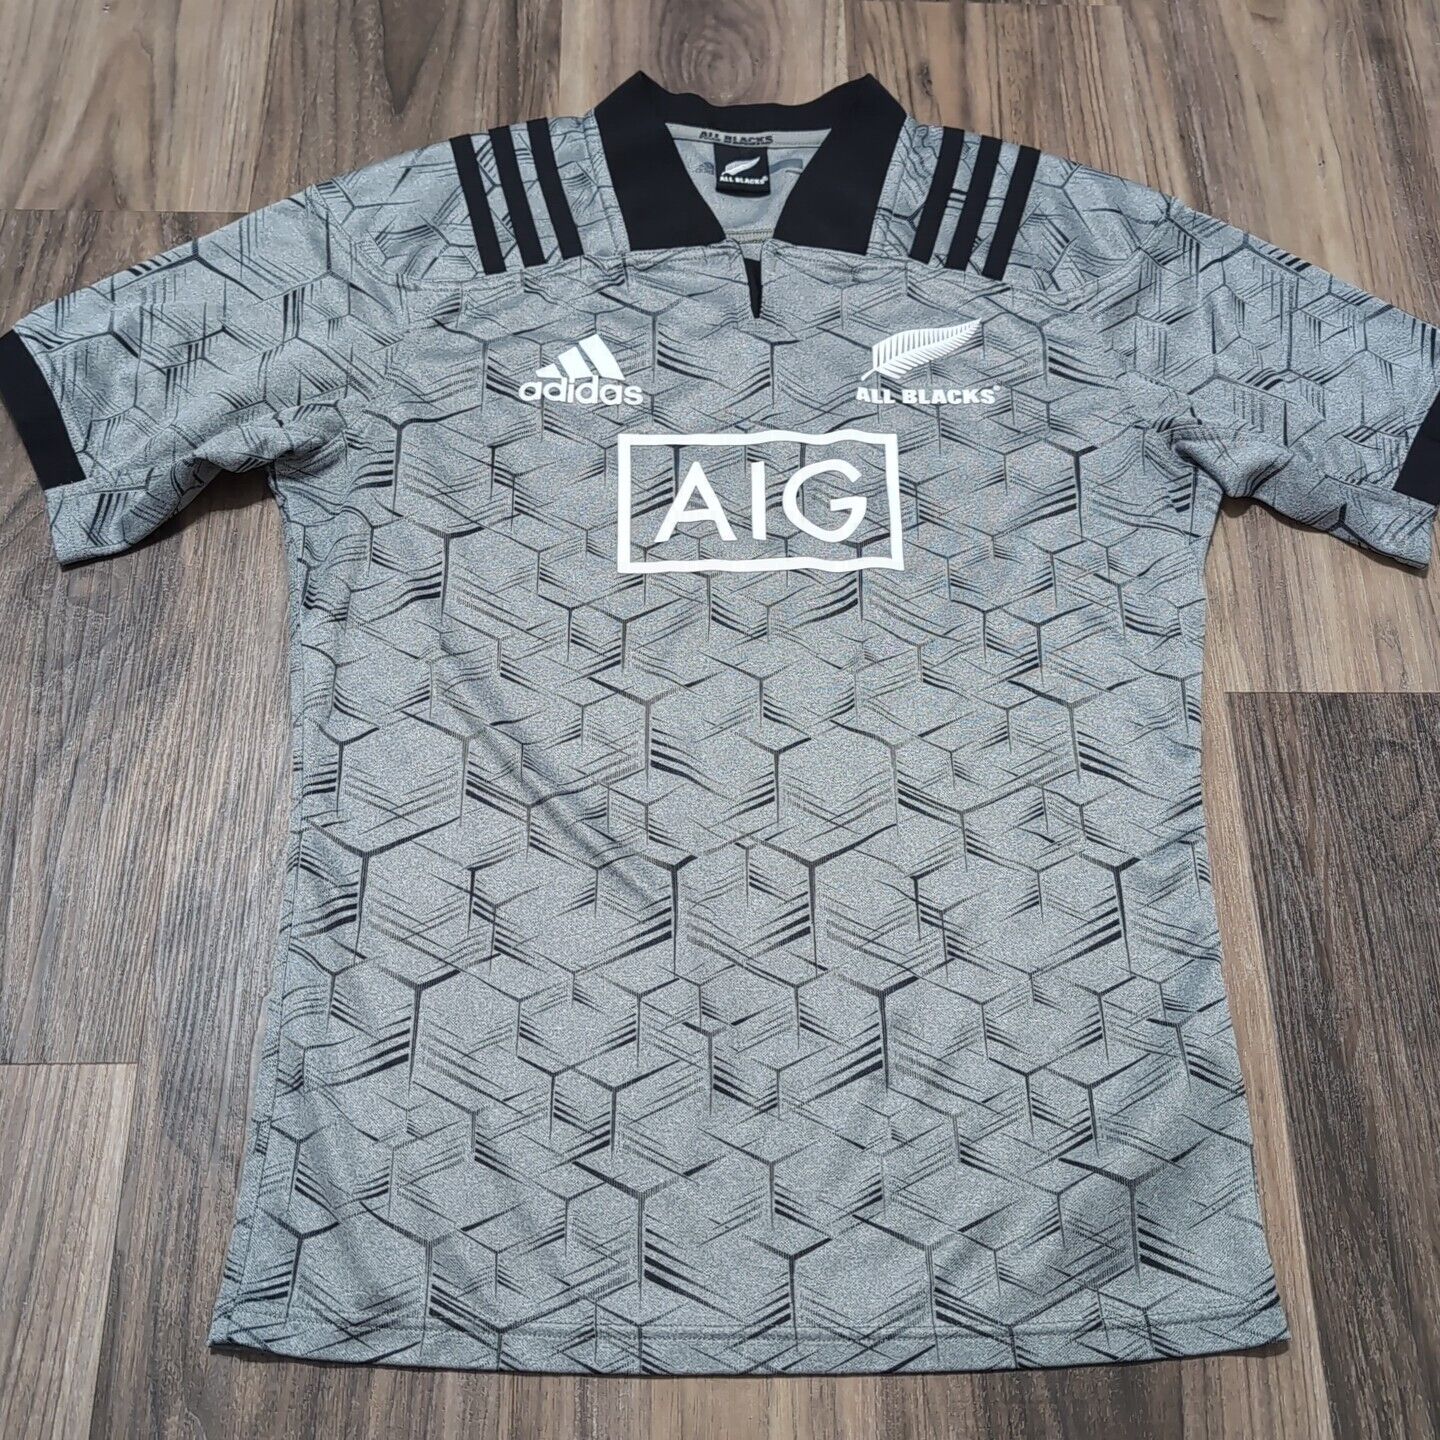 NEW ZEALAND ALL BLACKS 2018 2019 TRAINING SHIRT RUGBY JERSEY ADIDAS MENS SIZE L